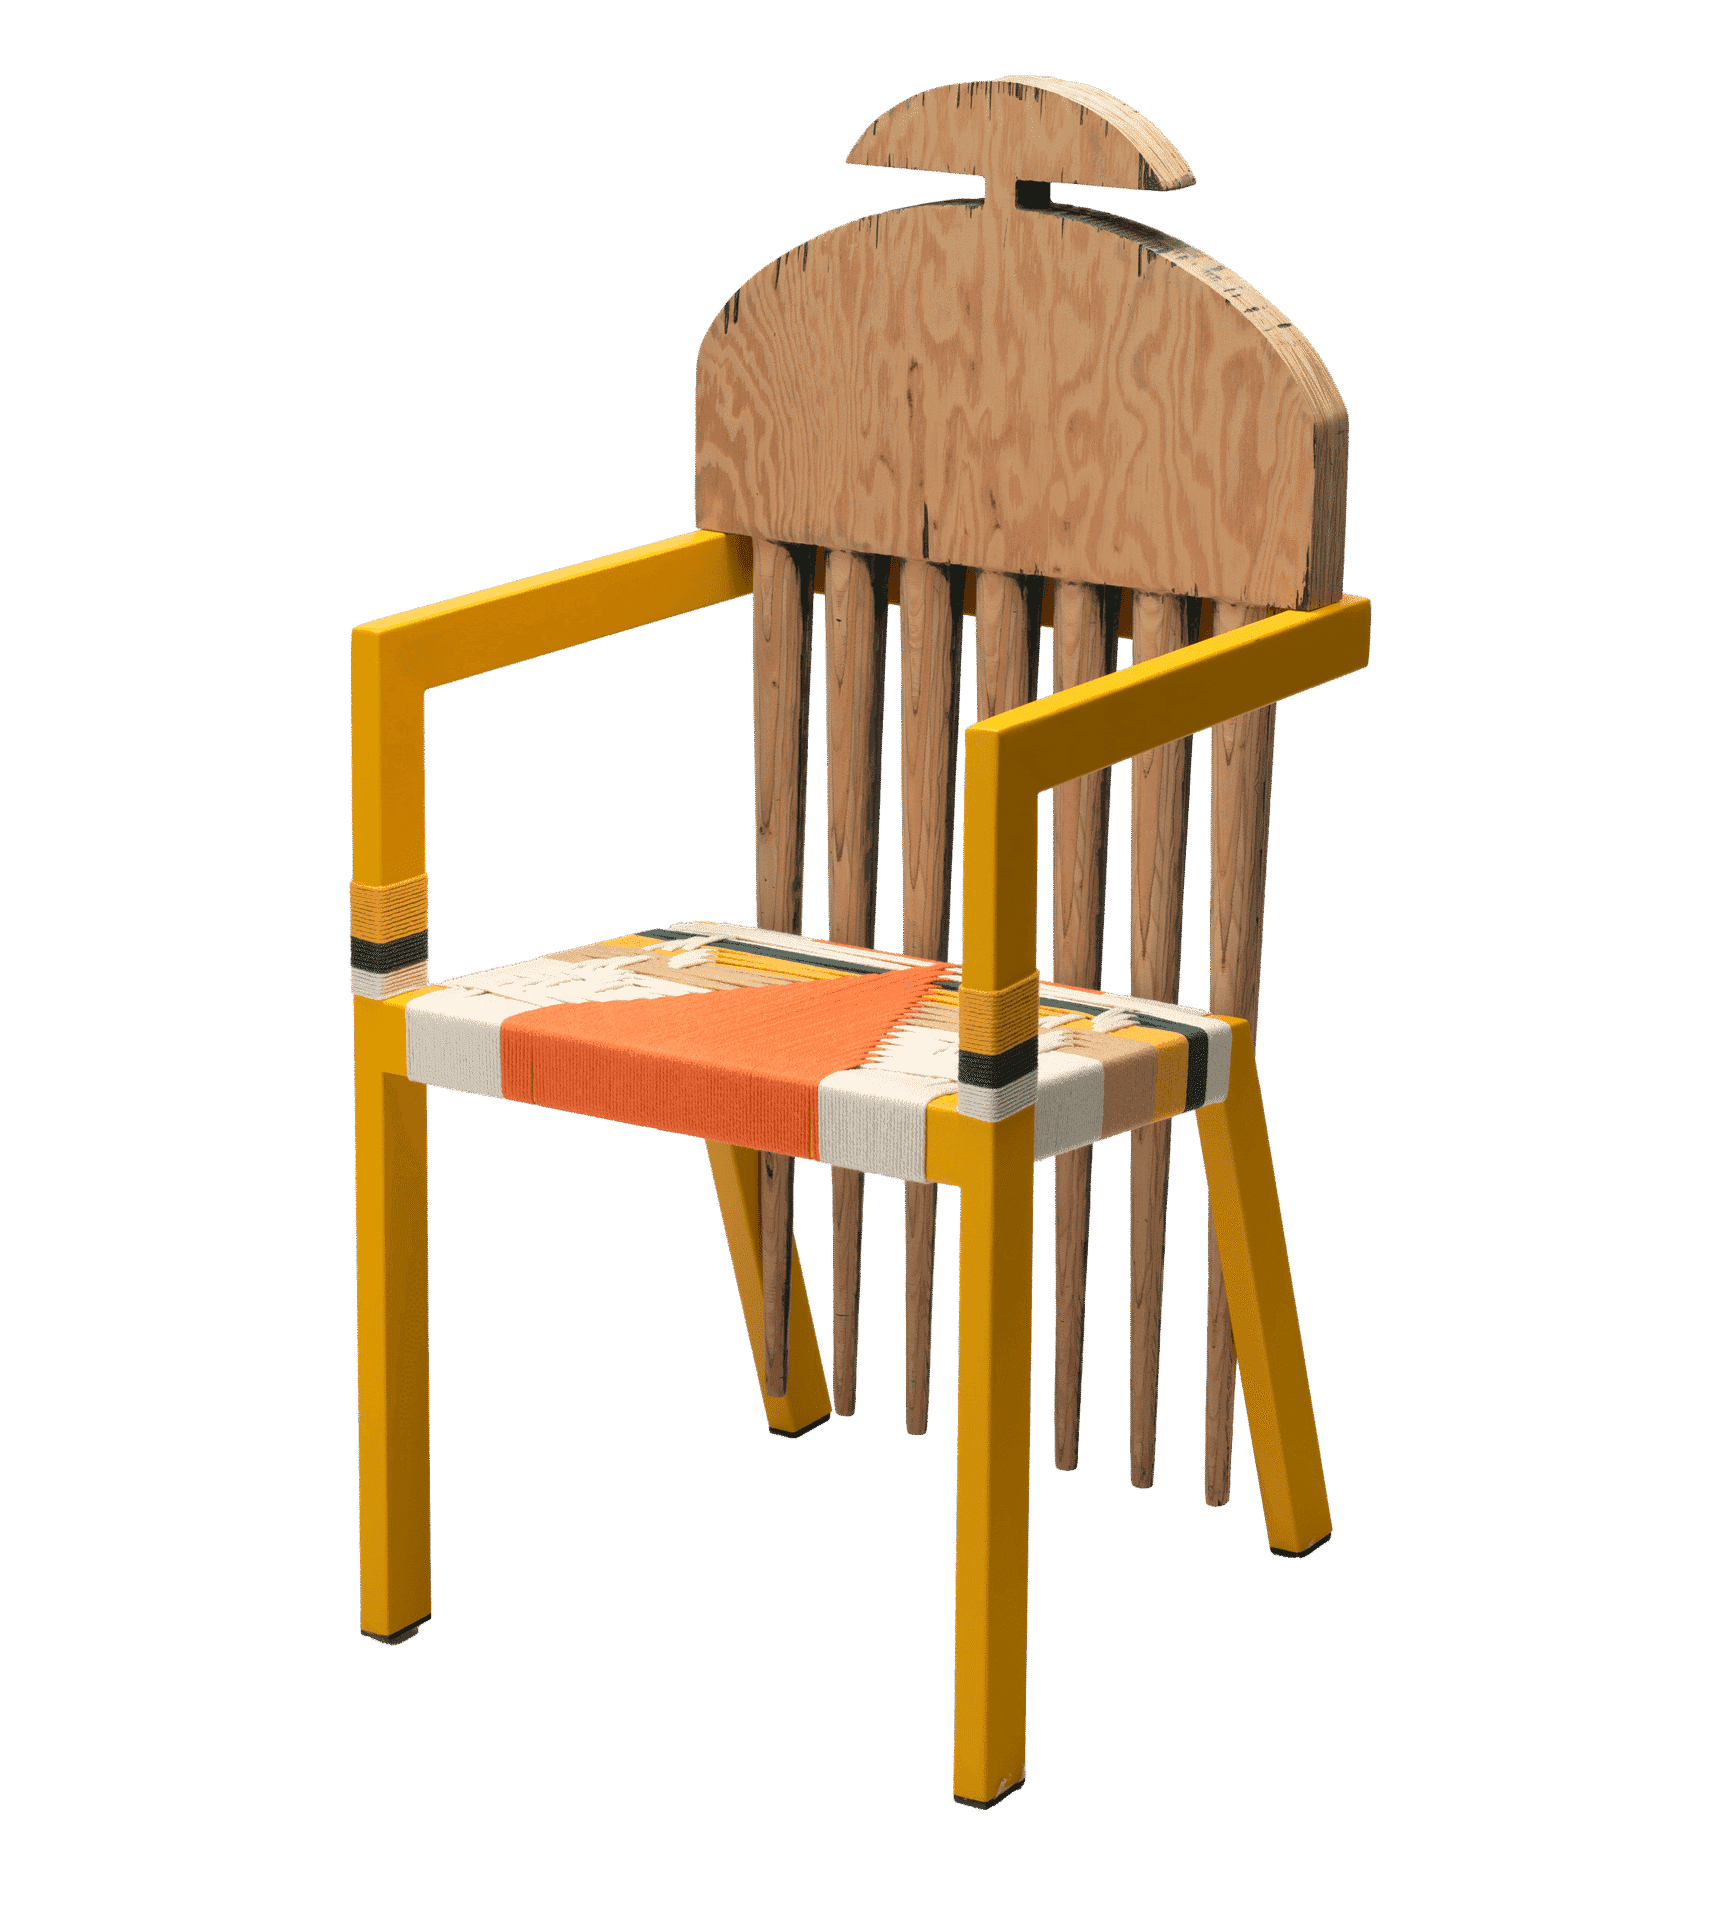 Wooden porch chair with chairback that looks like an Afro Pick that extend downwards.